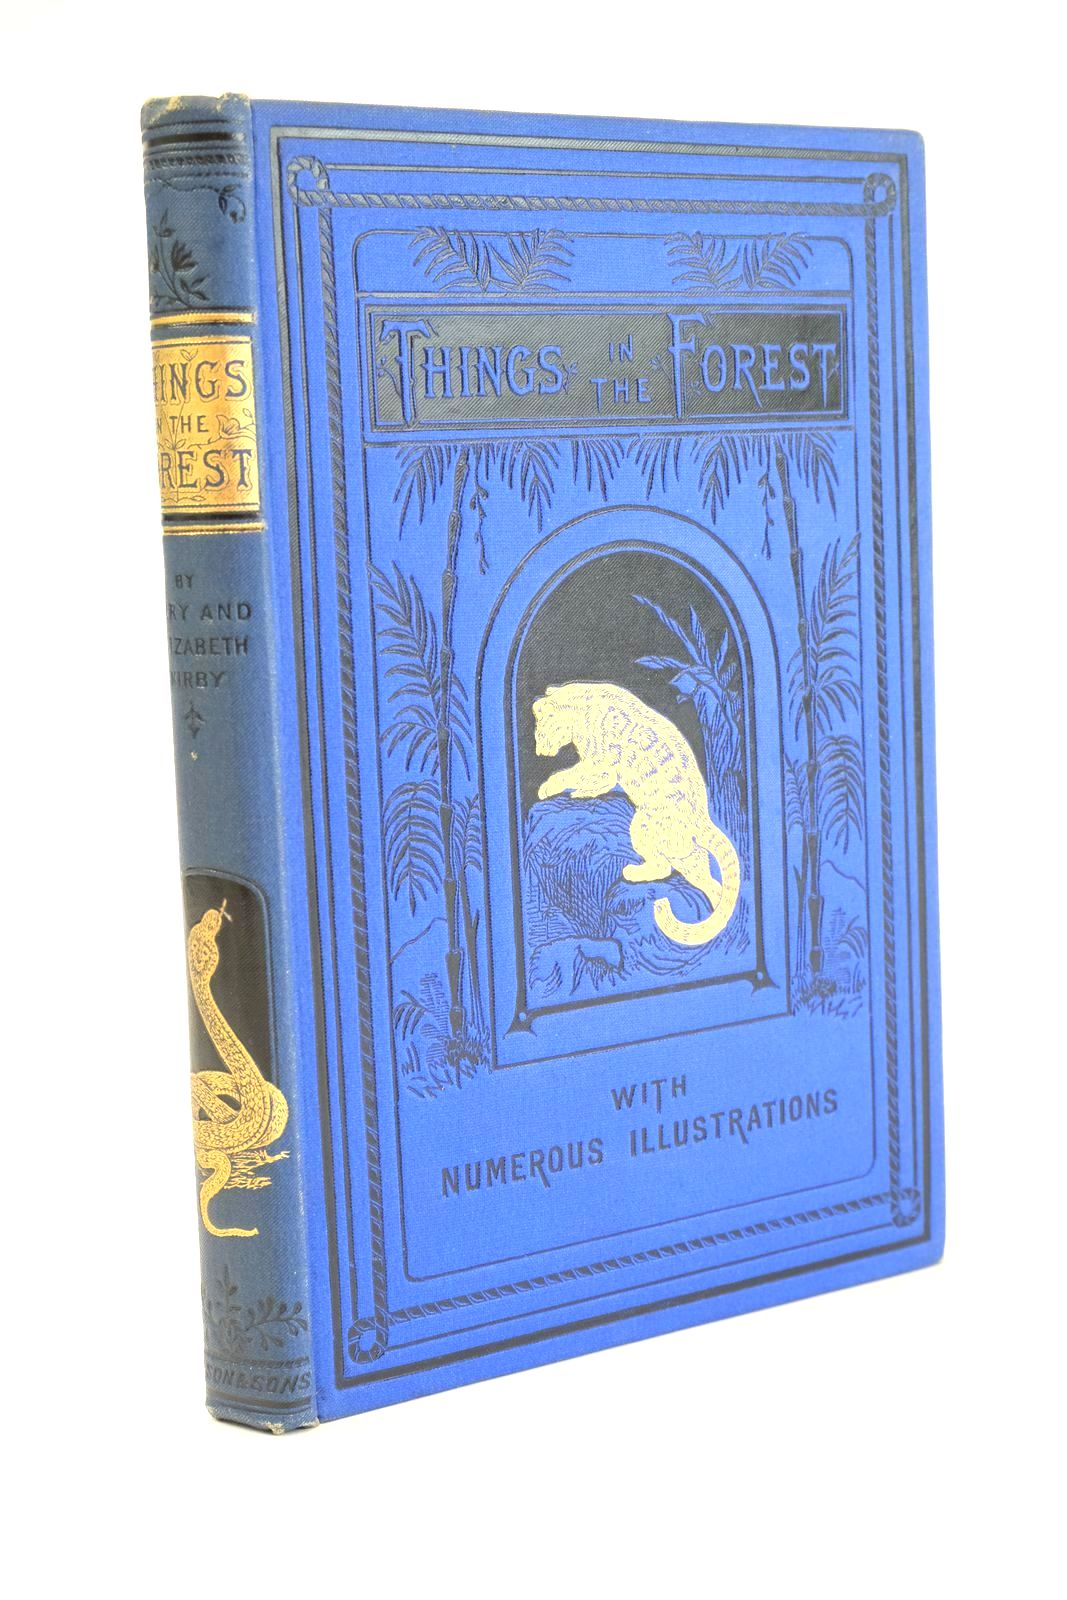 Photo of THINGS IN THE FOREST - A BOOK FOR THE YOUNG written by Kirby, Mary
Kirby, Elizabeth published by T. Nelson & Sons (STOCK CODE: 1325342)  for sale by Stella & Rose's Books